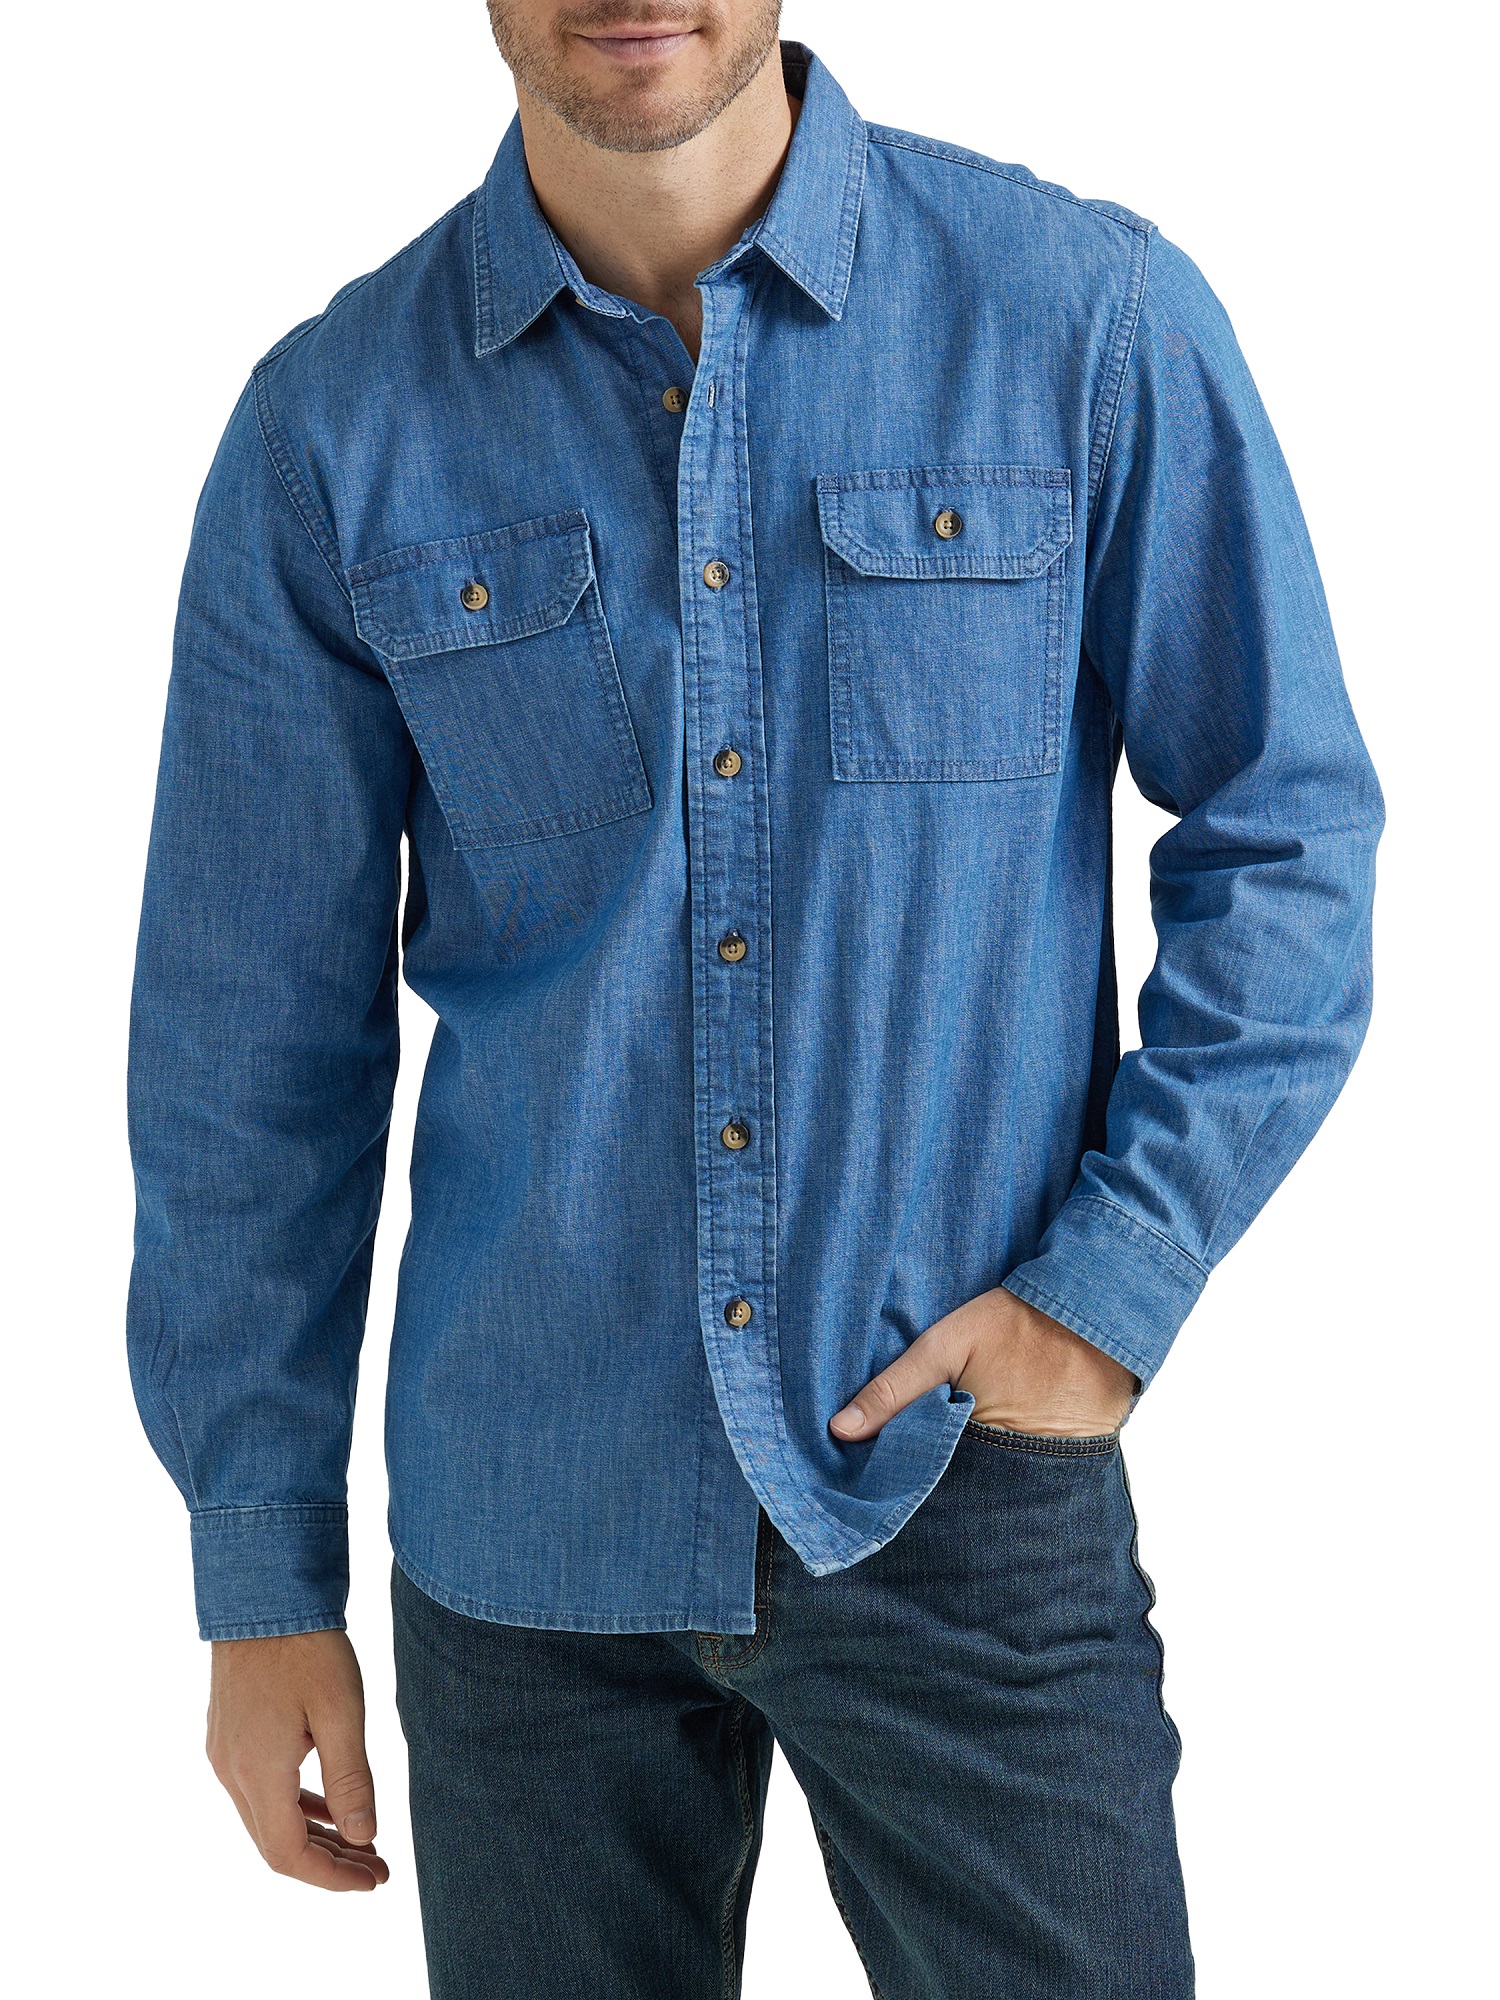 Wrangler® Men's and Big Men's Relaxed Fit Long Sleeve Woven Shirt, Sizes S-5XL - image 1 of 4